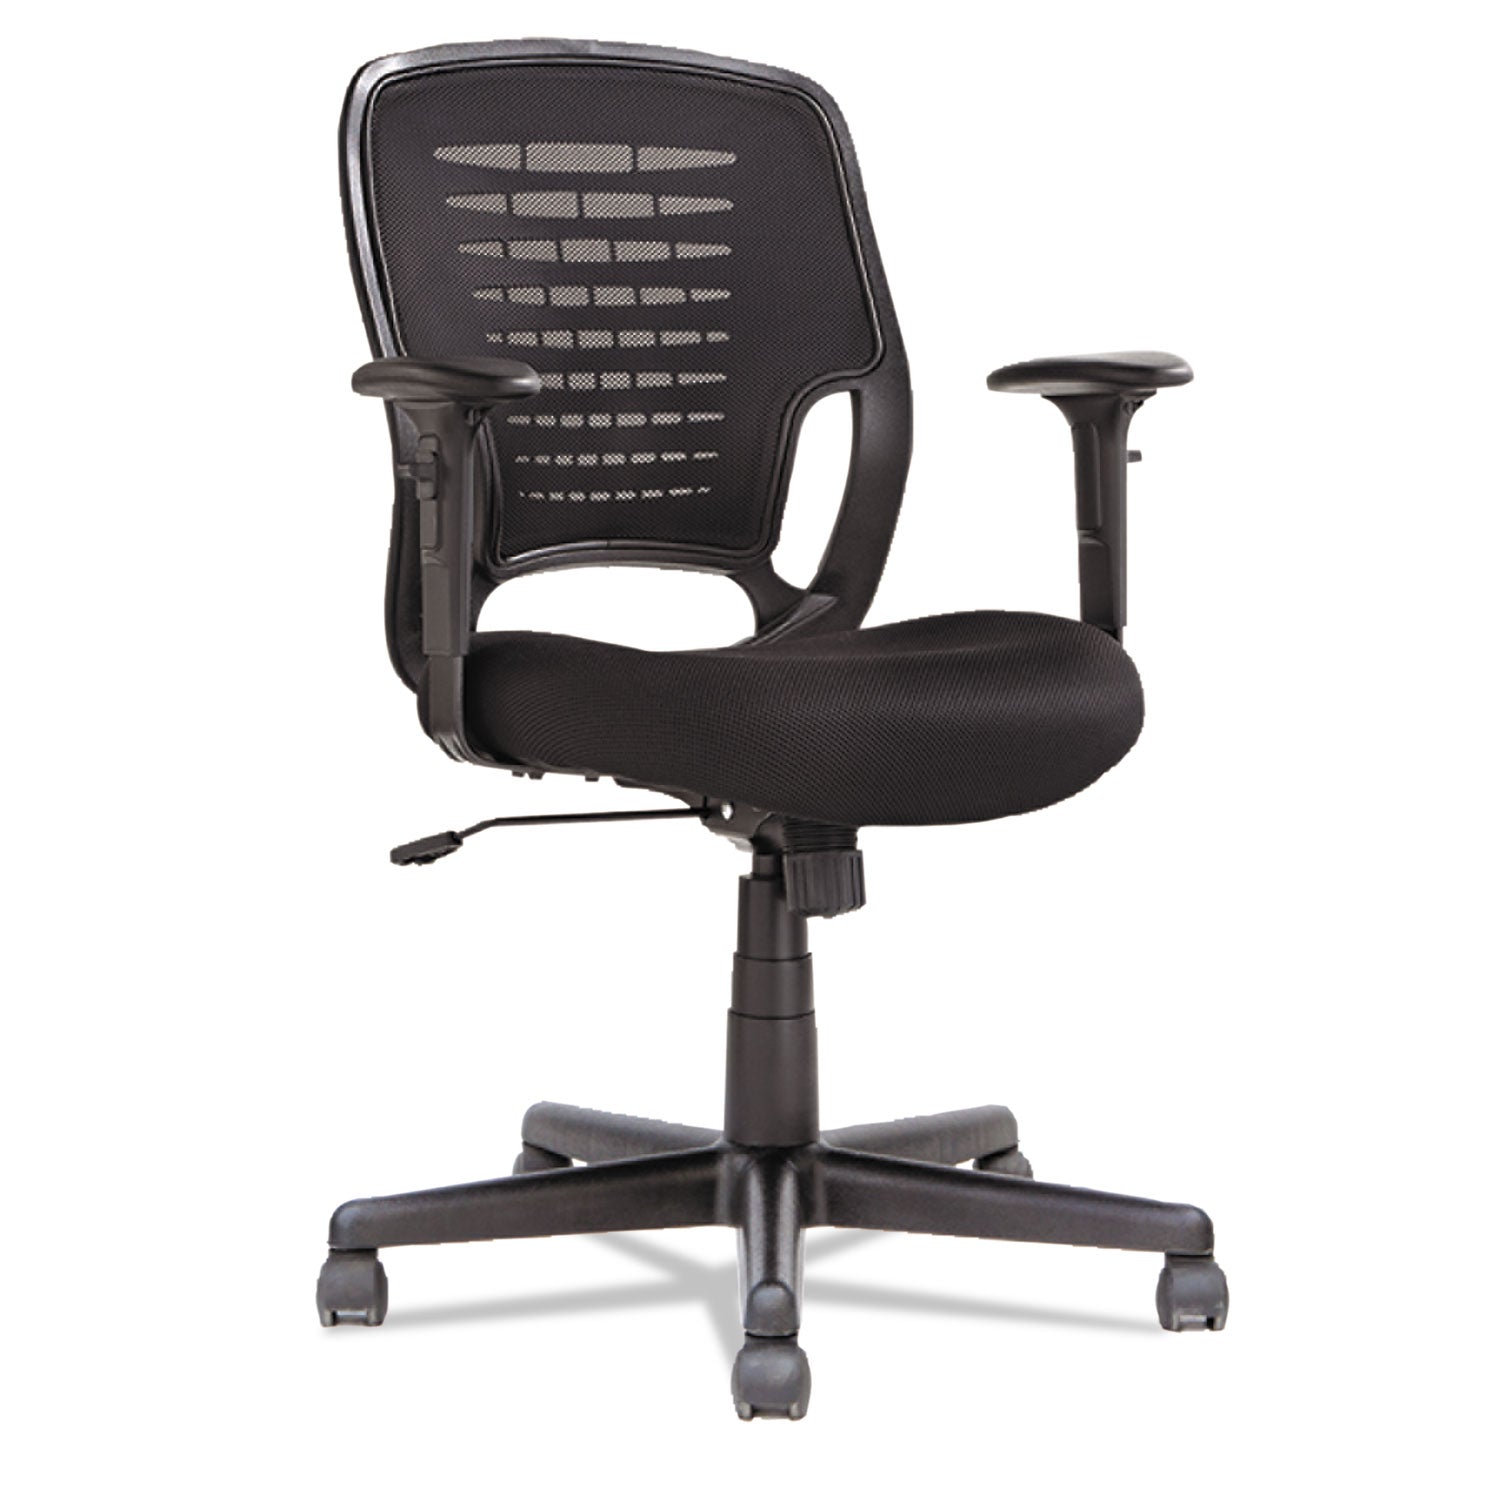 Swivel/Tilt Mesh Task Chair, Supports Up to 250 lb, 17.71" to 21.65" Seat Height, Black - 